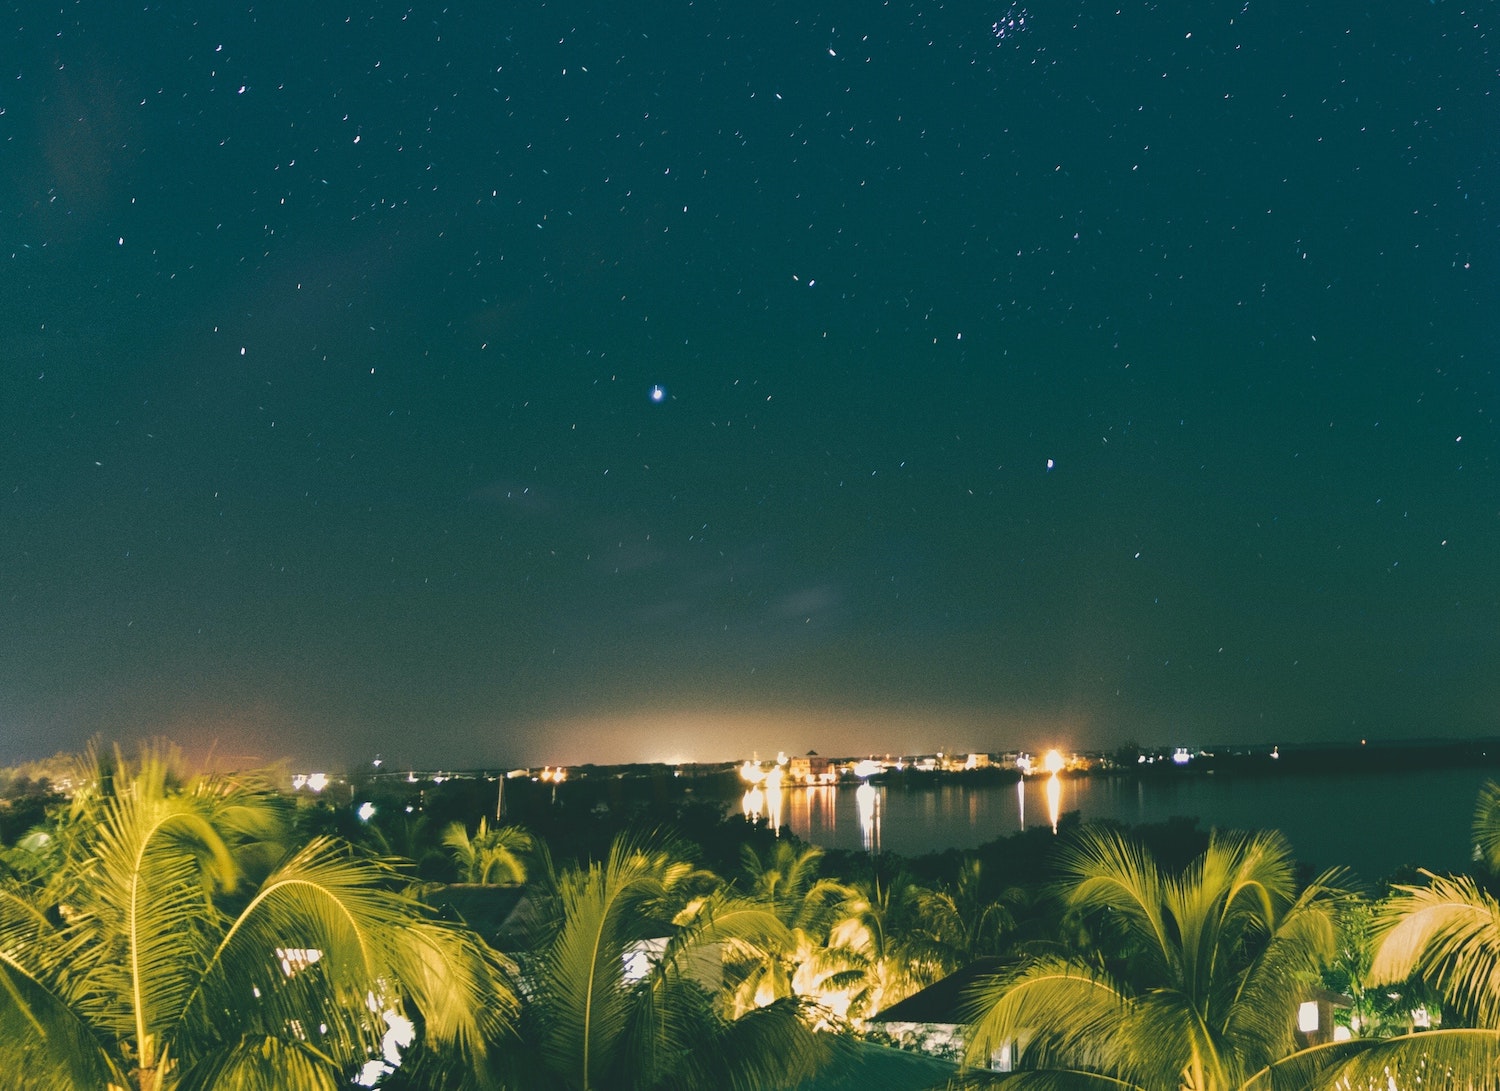 the star night sky in belize with city lights glowing and palm trees swaying